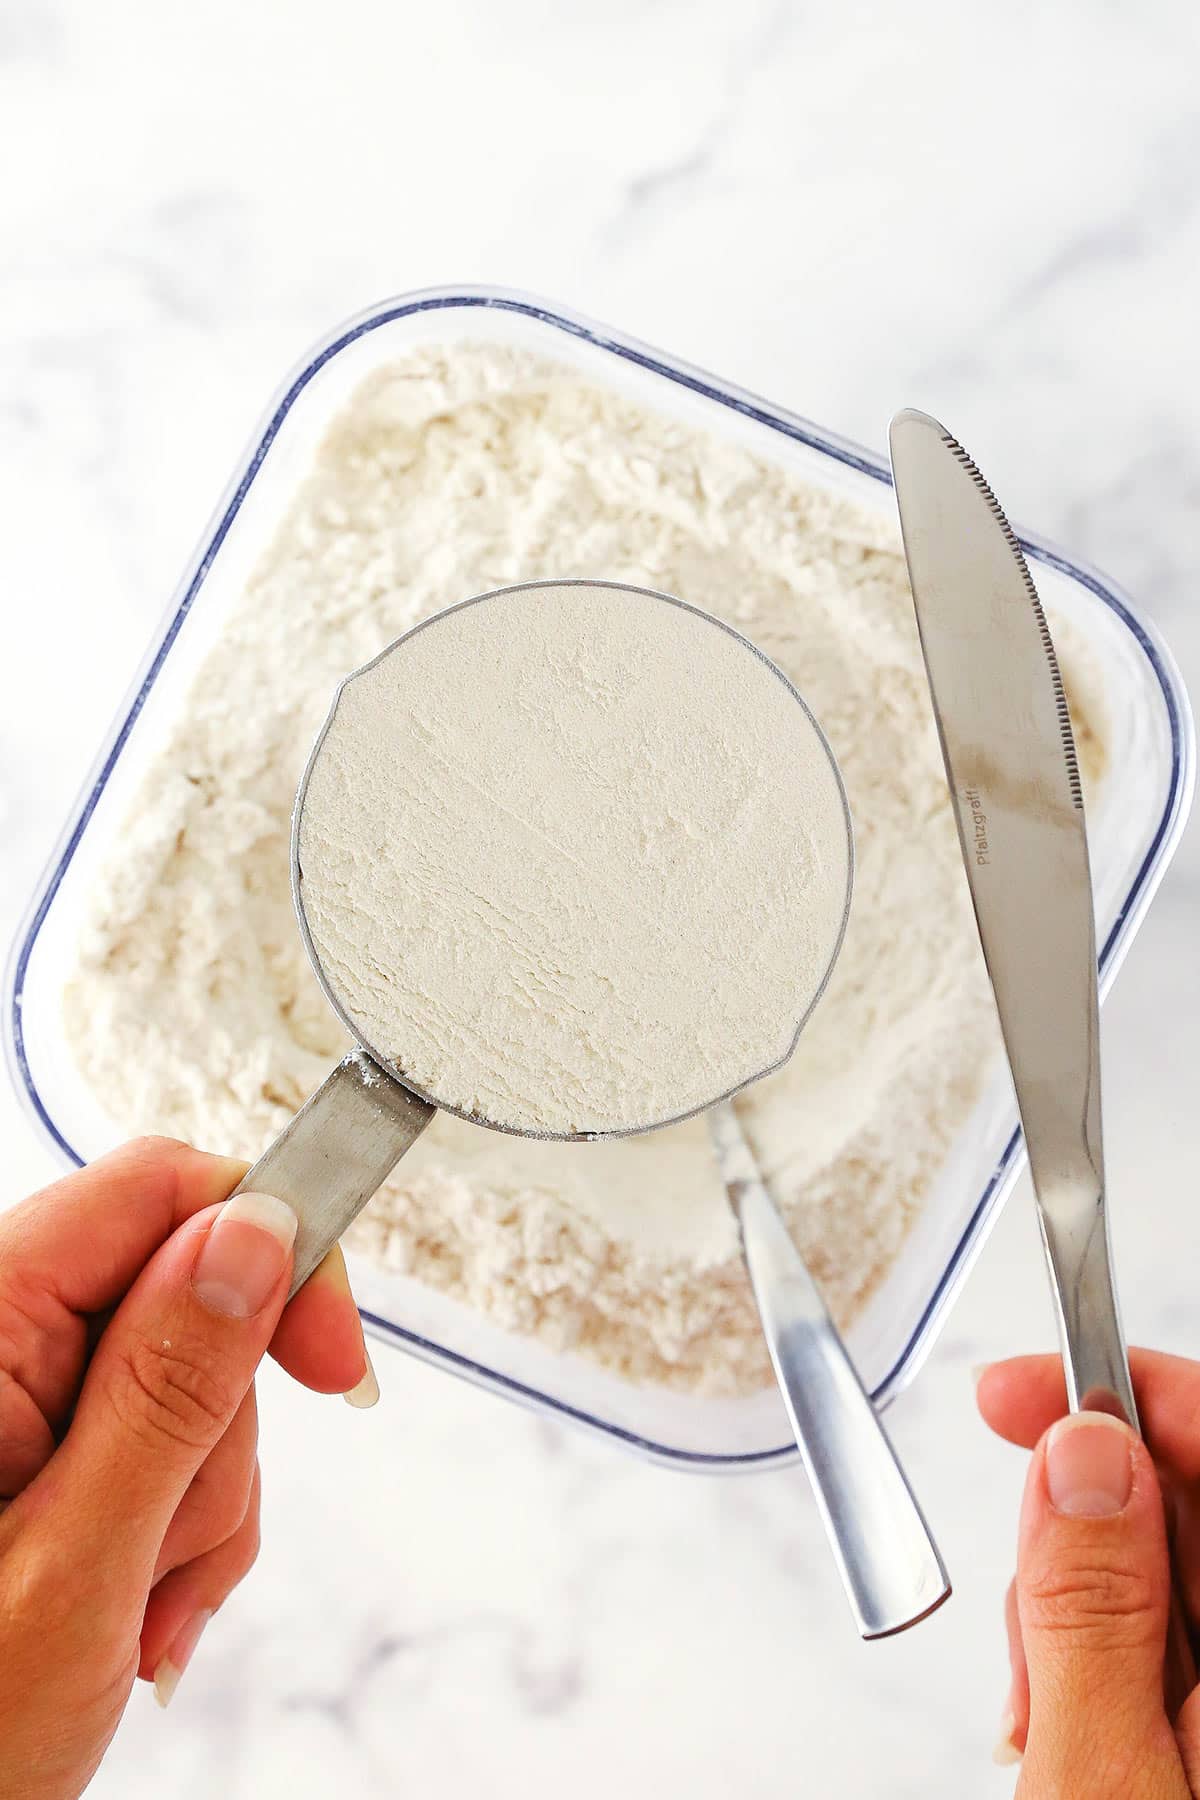 A butter knife and a cup of all-purpose flour being held above a container full of flour